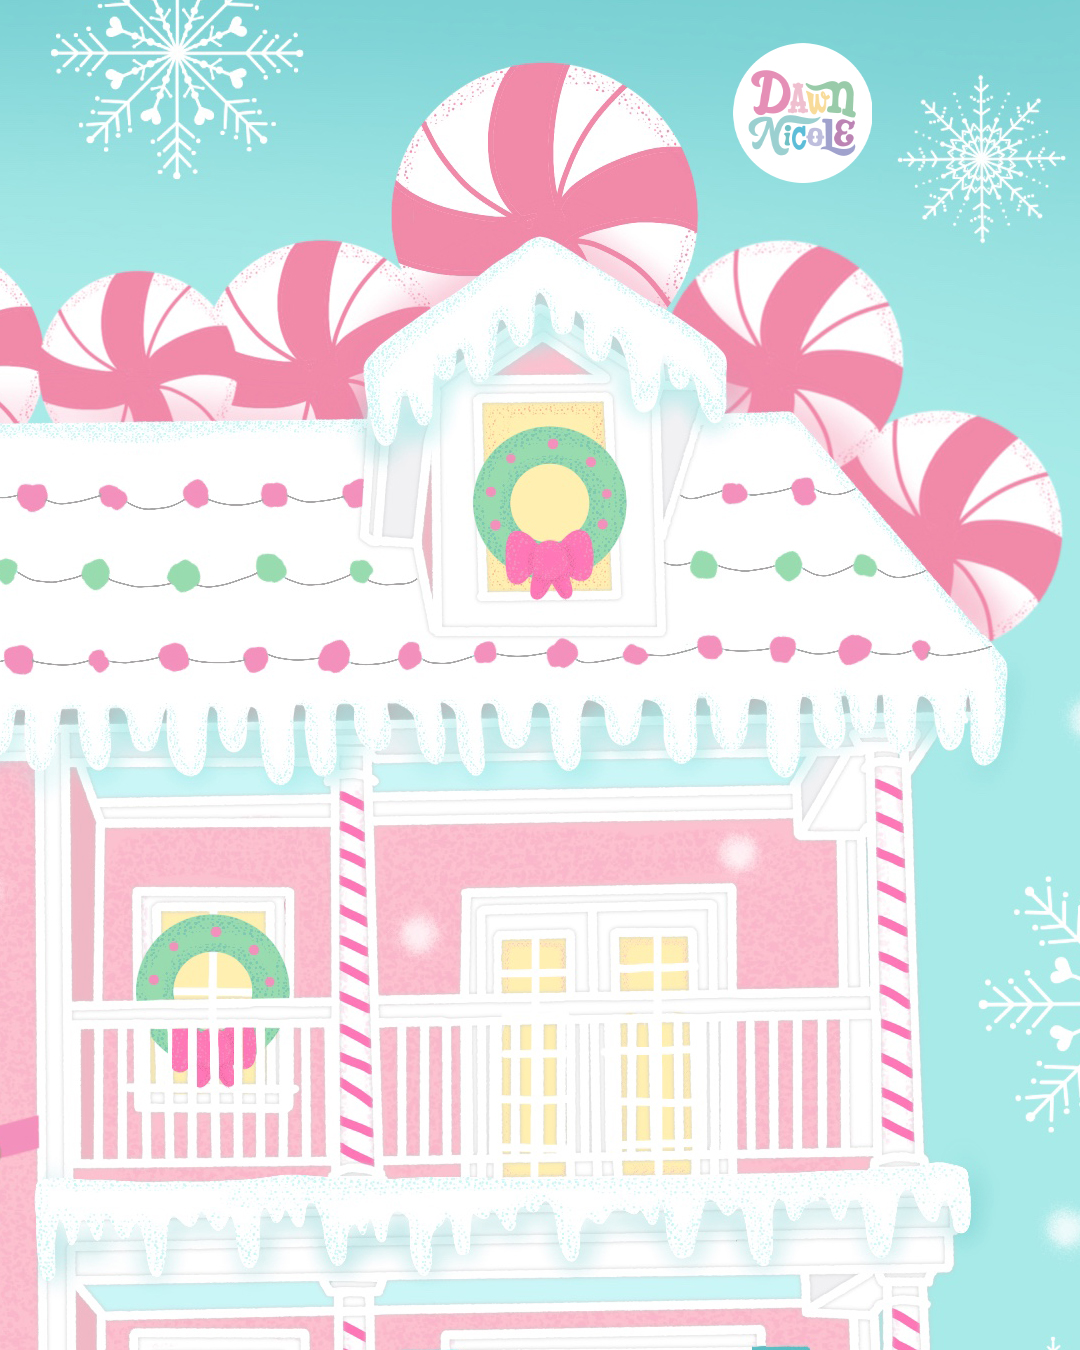 Procreate Illustration: Winter Wonderland Home. How to turn your home into an adorable gingerbread house inspired illustration!